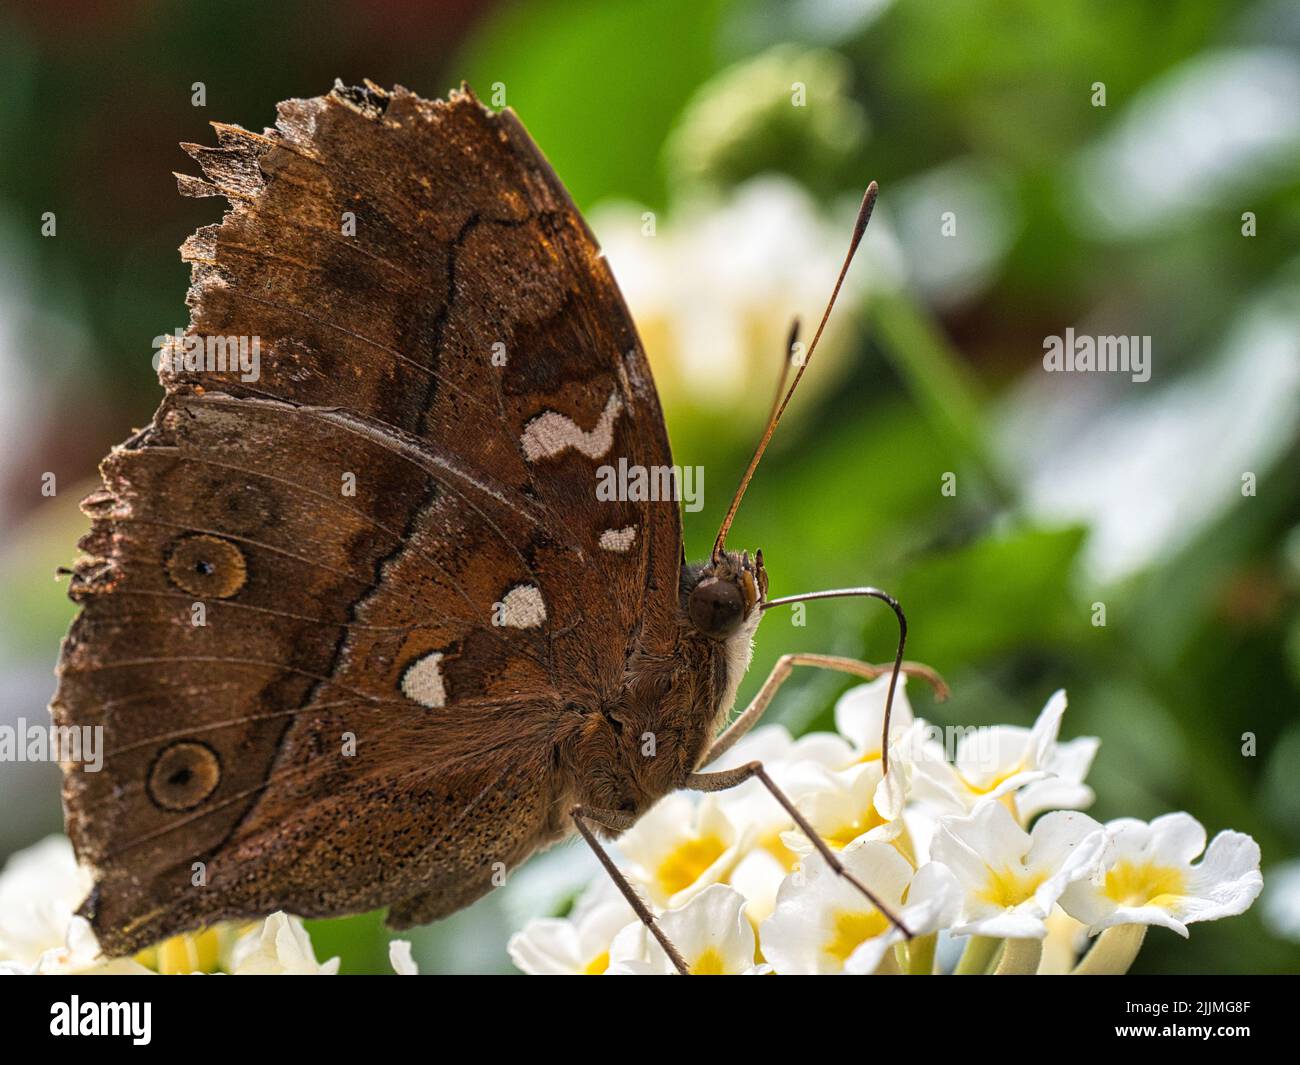 A macro shot of a beautiful butterfly sipping nectar from a white flower against a blurred background Stock Photo